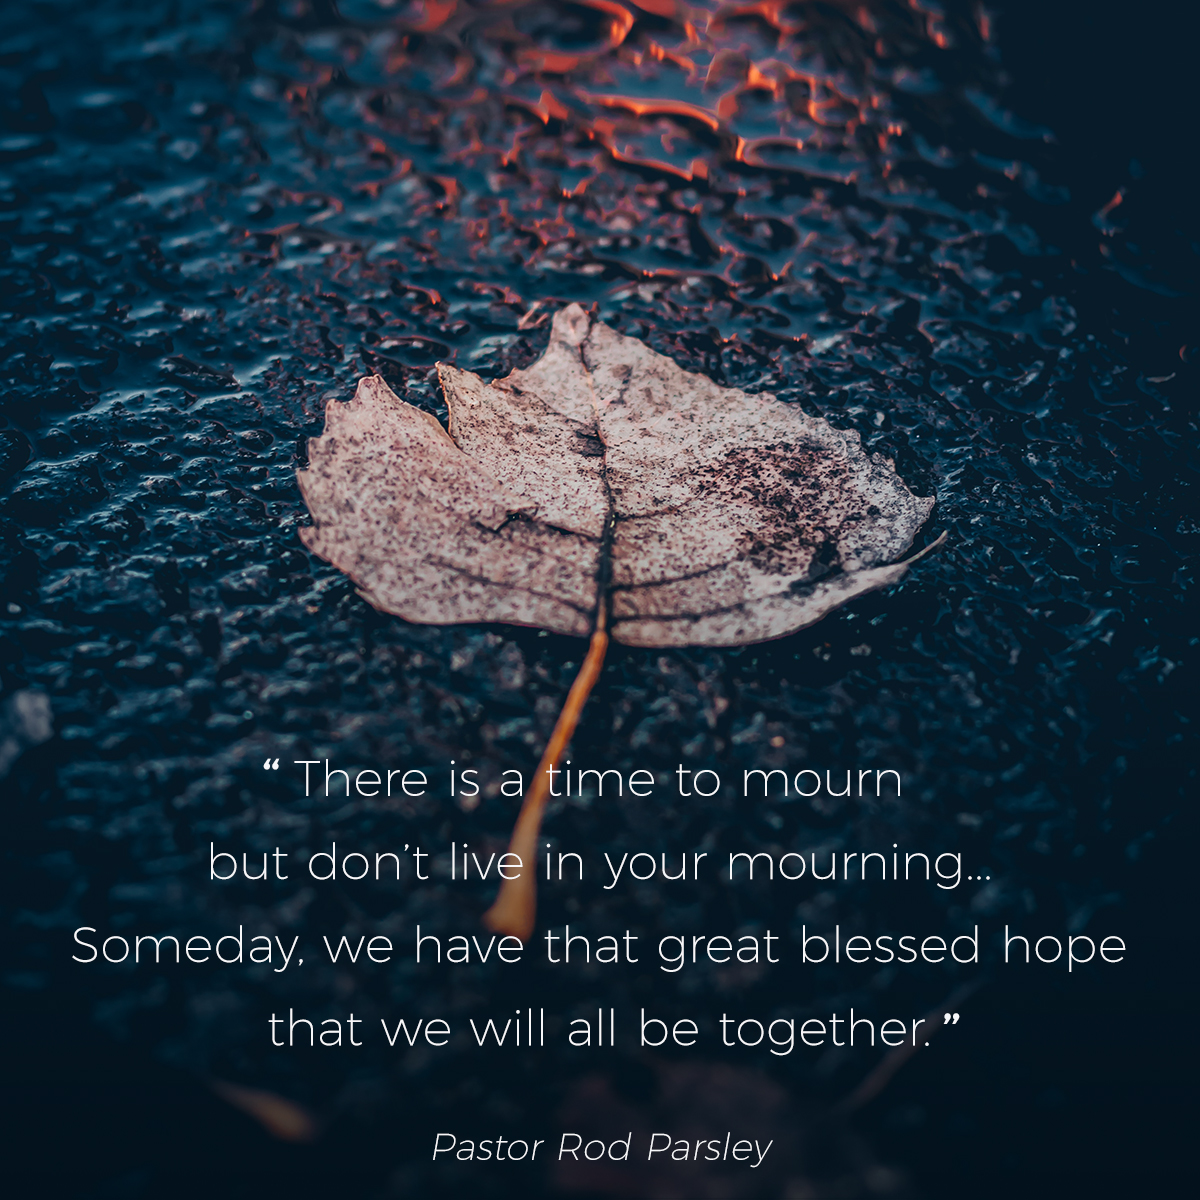 “There is a time to mourn but don’t live in your mourning … Someday, we have that great blessed hope that we will all be together.” – Pastor Rod Parsley